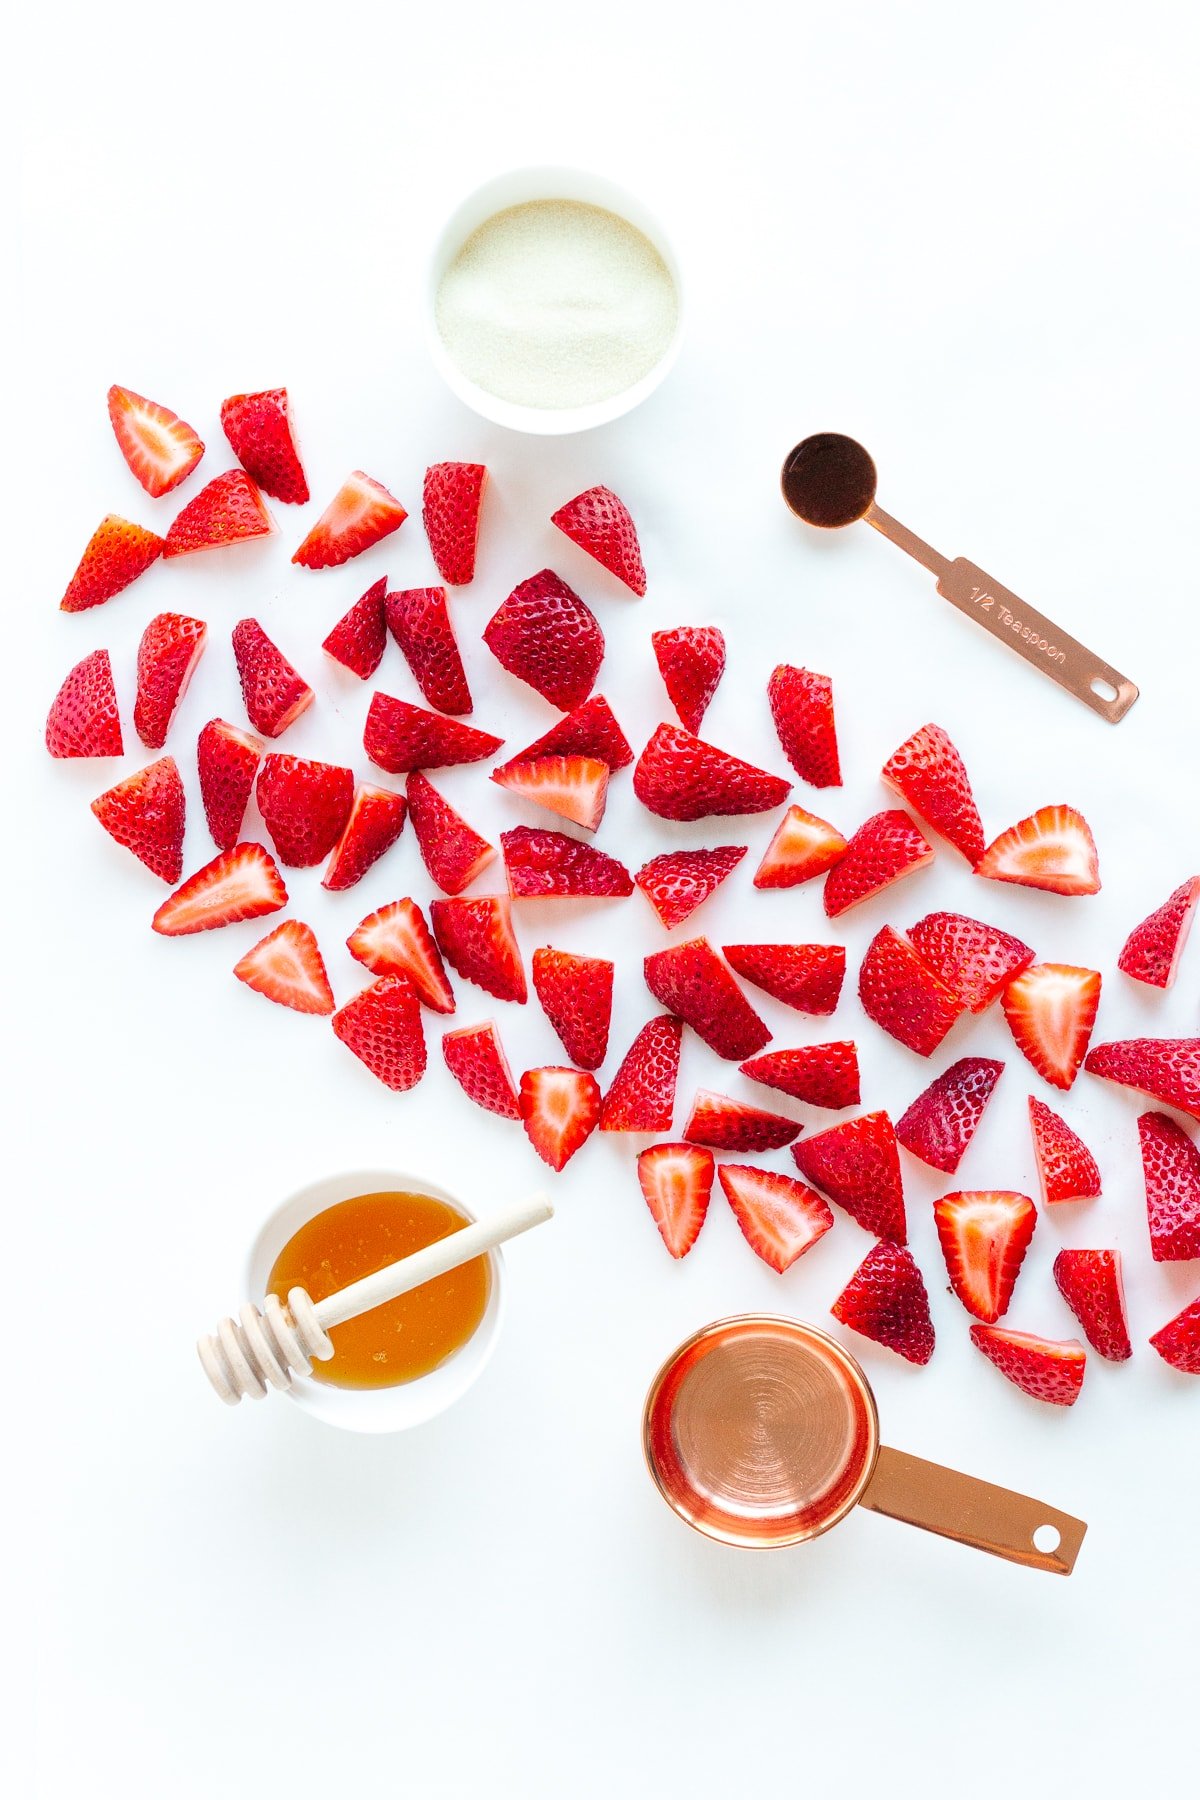 Ingredients needed to make healthy strawberry gummies.